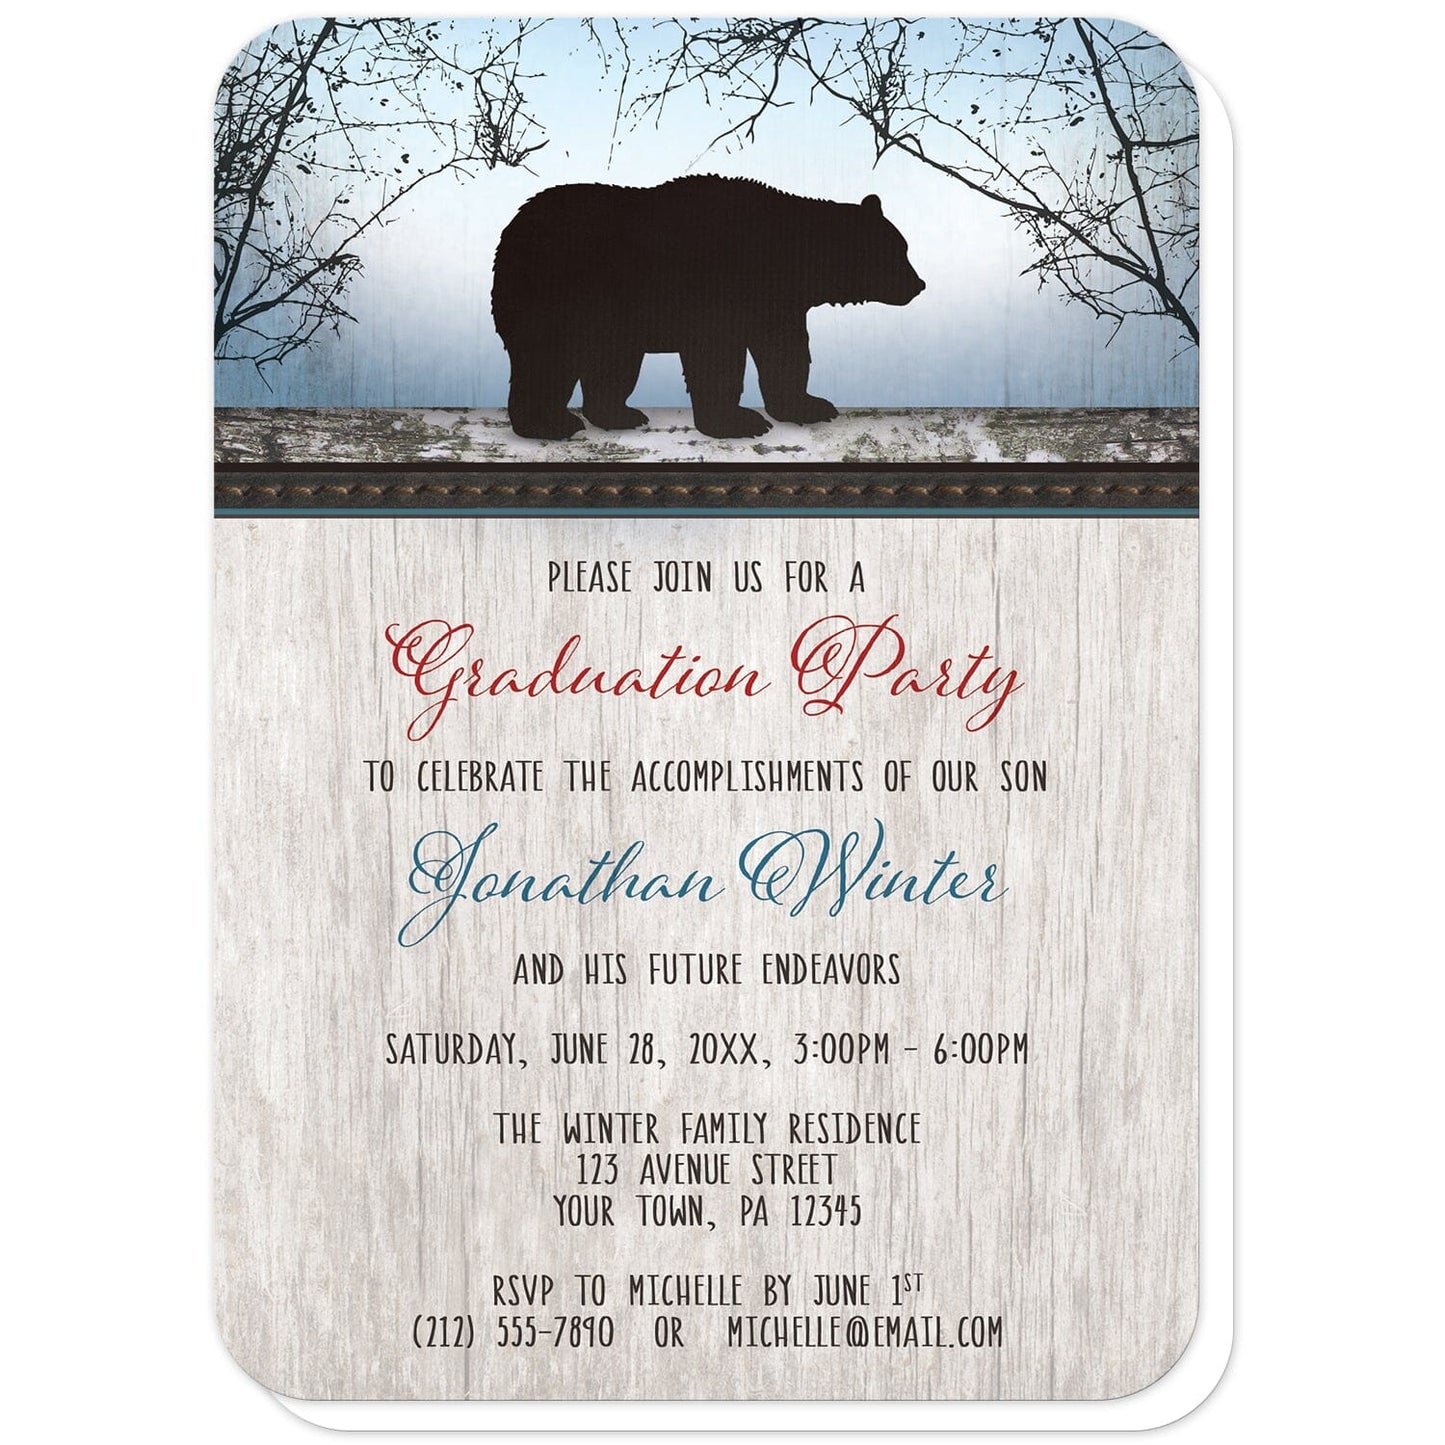 Rustic Bear Wood Red Blue Graduation Party Invitations (with rounded corners) at Artistically Invited. Rustic bear wood red blue graduation party invitations with a dark silhouette bear on wooden log at the top, over a blue background with trees and a wood watermark. Your personalized graduation party details are custom printed in red, blue, and dark brown over a light rustic wood texture background below the bear design.